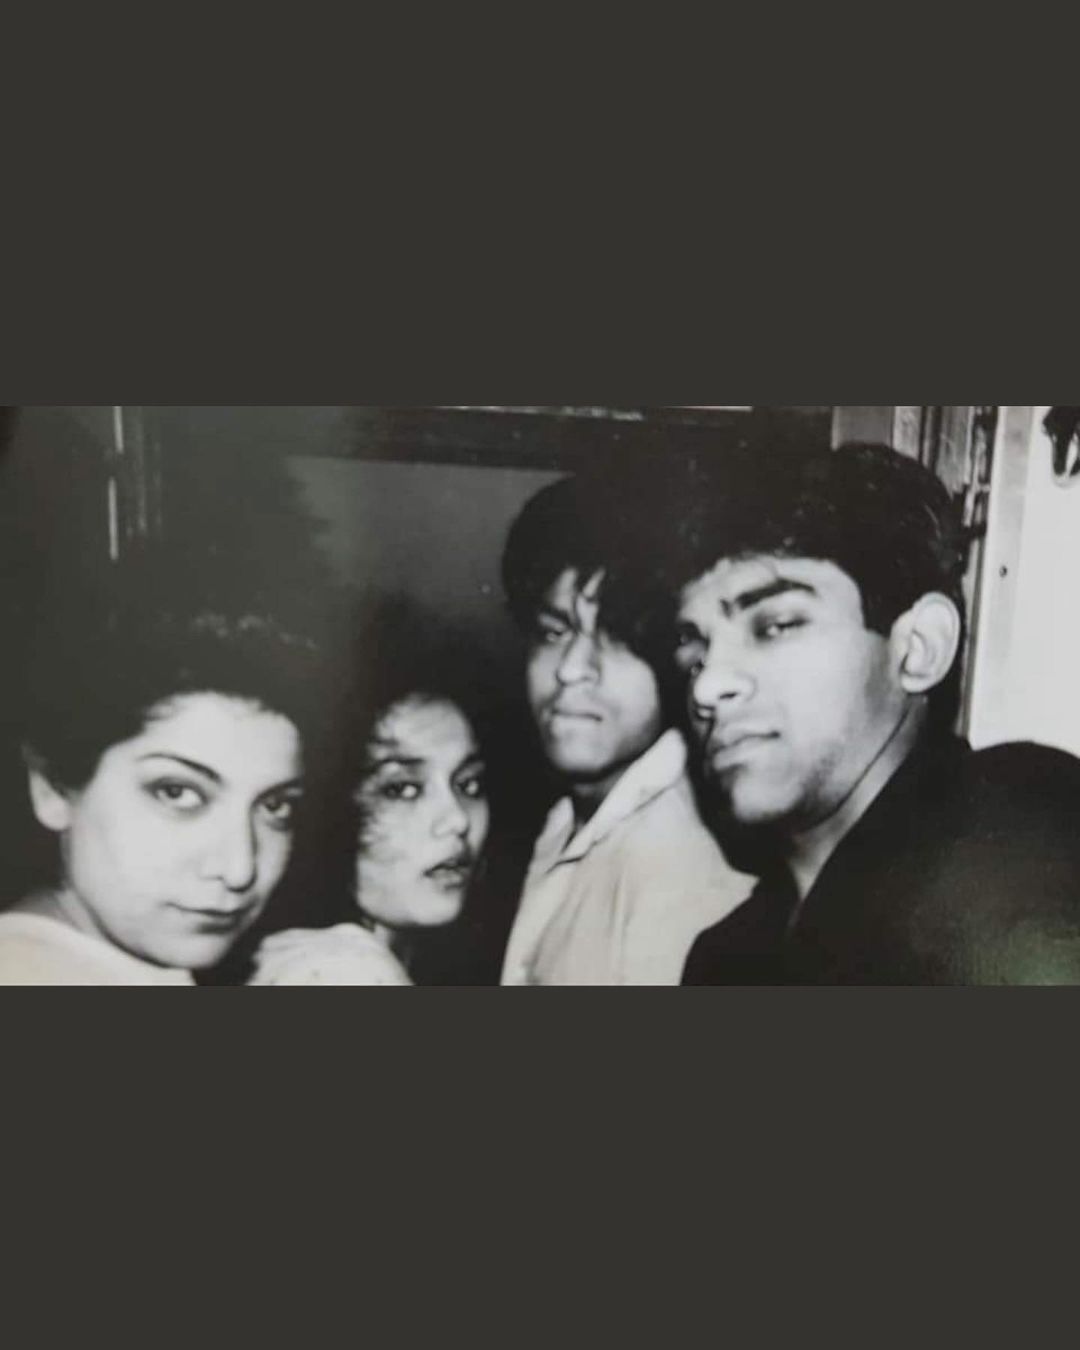 Rituraj Singh was also friends with Shah Rukh Khan. The two actors began their journey together at a theatre school. The late actor had posted this picture as an ode to SRK on his birthday